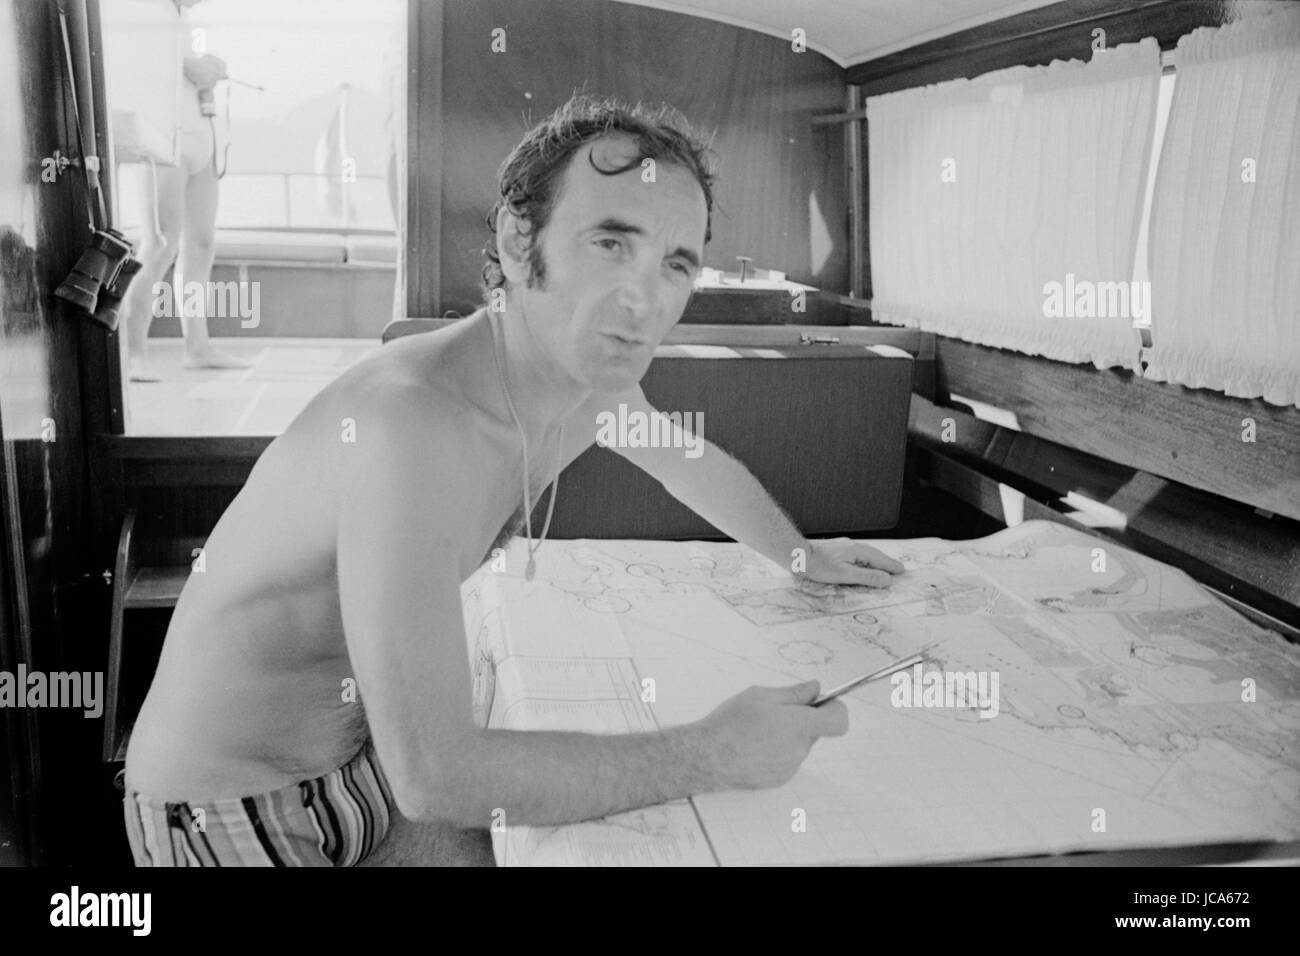 Charles Aznavour with wife Ulla Thorsell enjoying their holidays in their home in Mandelieu-La-Napoule (Alpes-Maritimes, France).  Summer 1970 Photo Michael Holtz Stock Photo